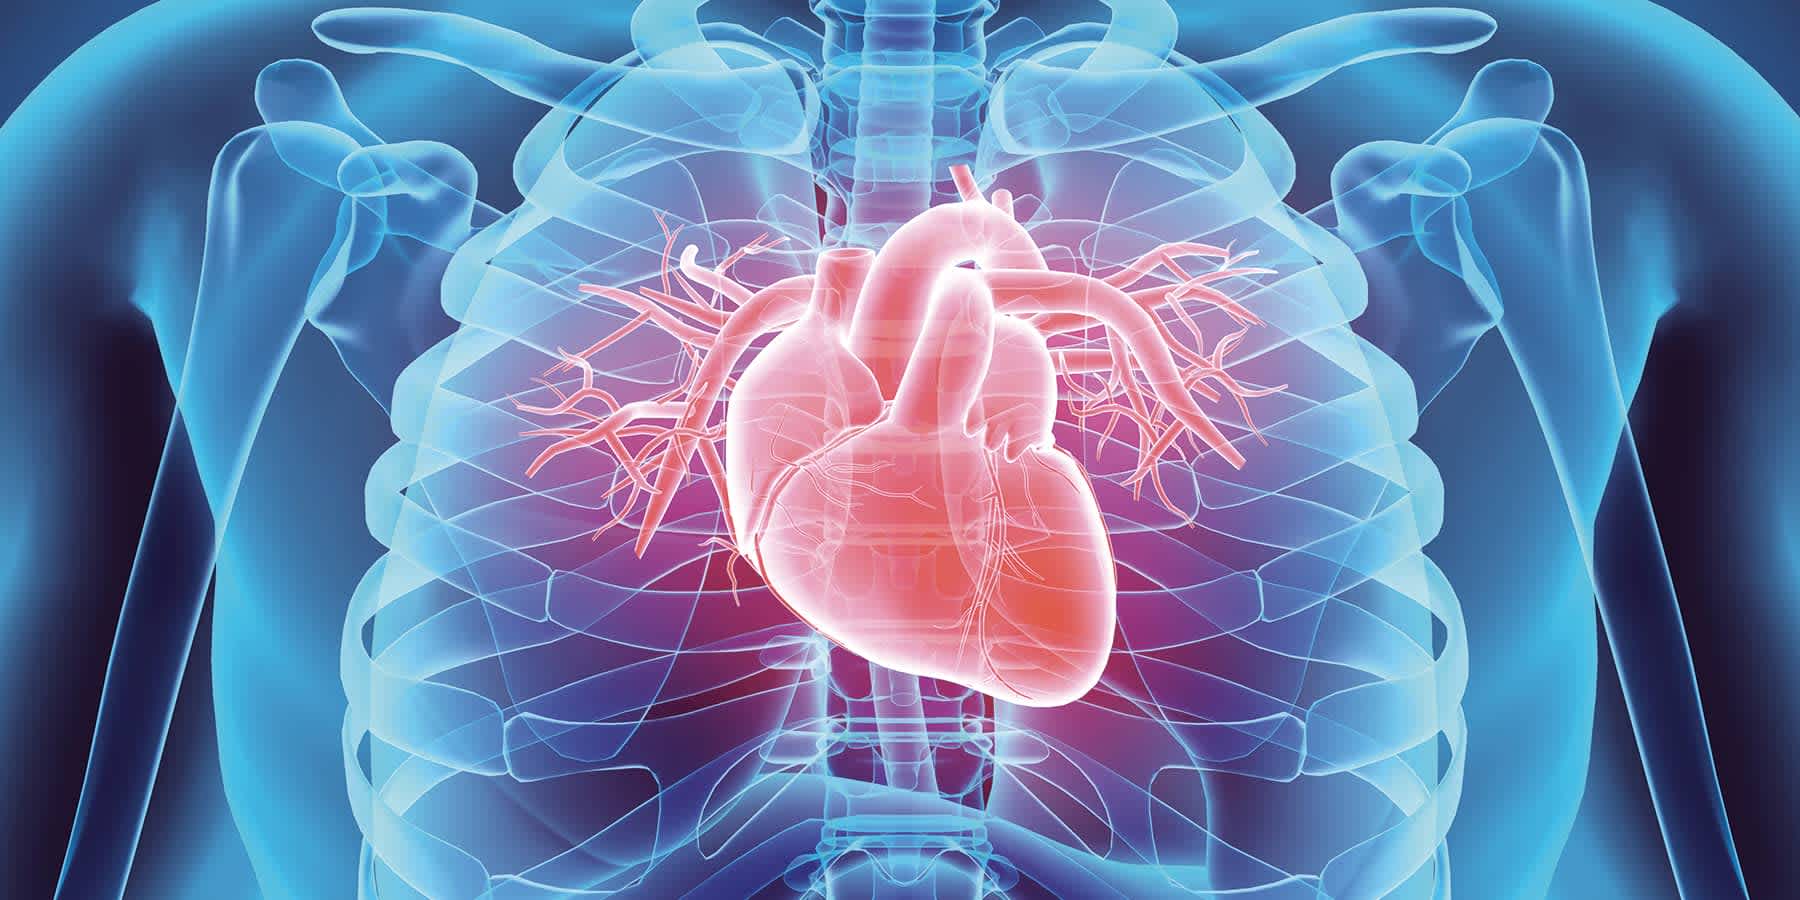 Illustration of anatomical heart to highlight signs of an unhealthy heart rate